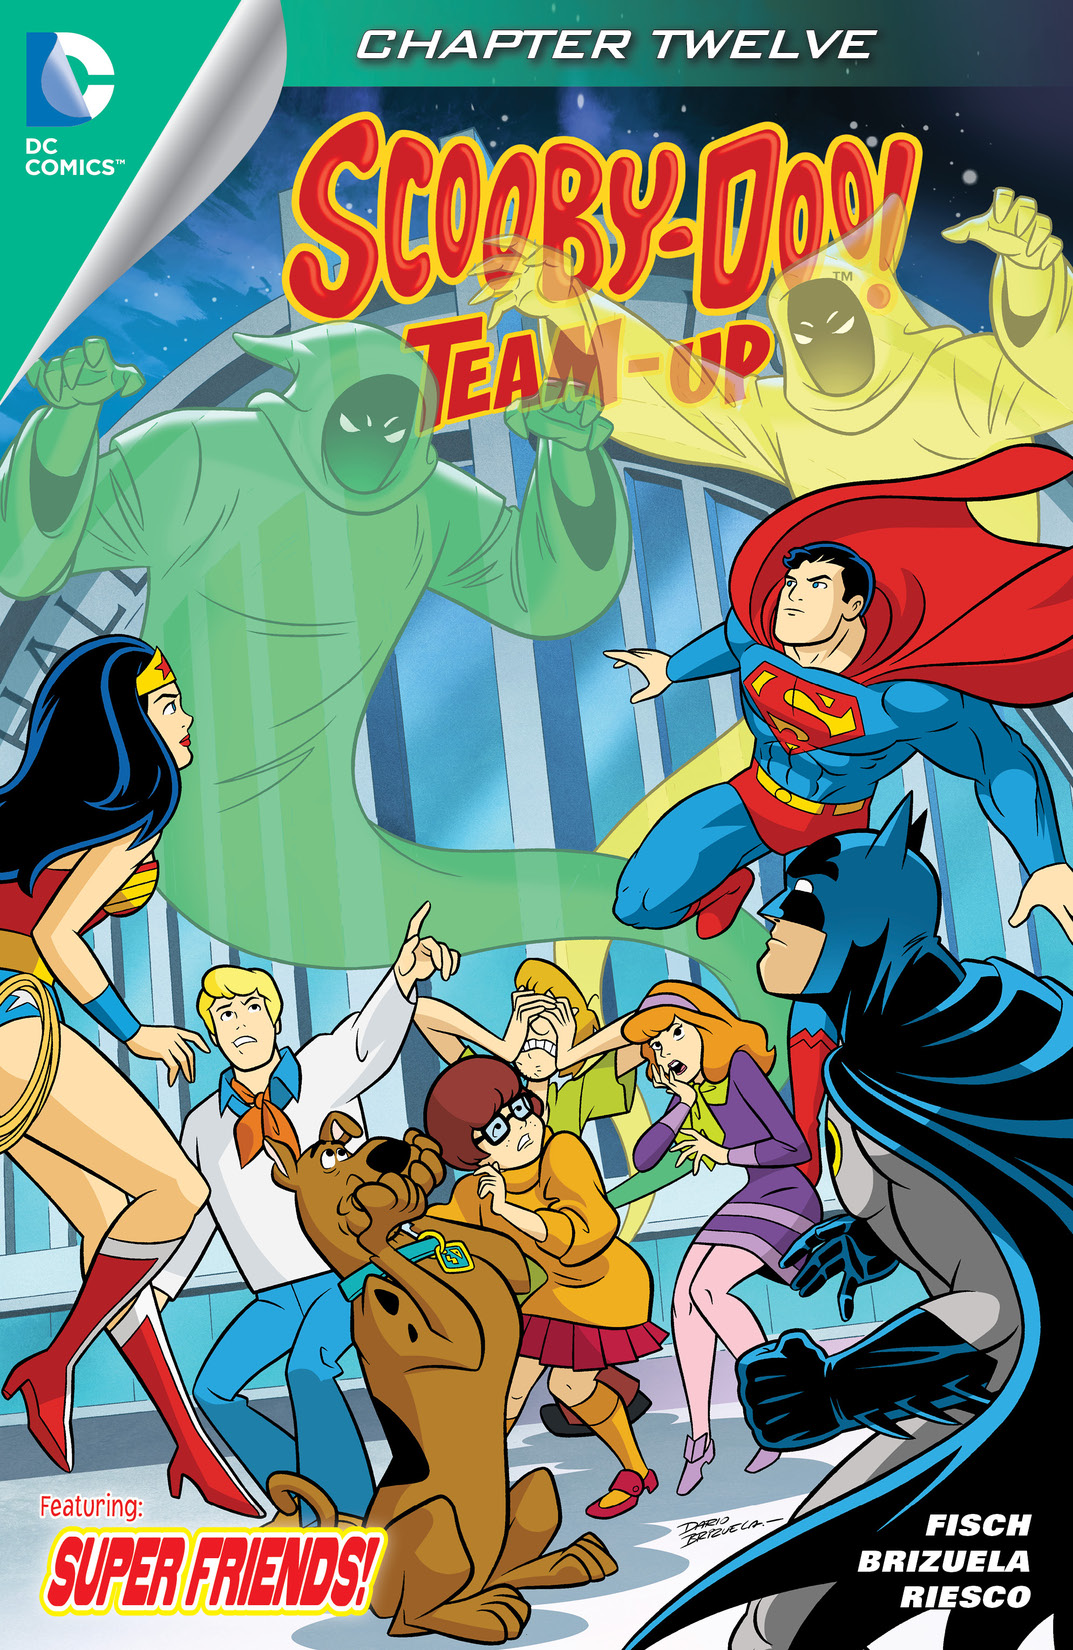 Scooby-Doo Team-Up #12 preview images